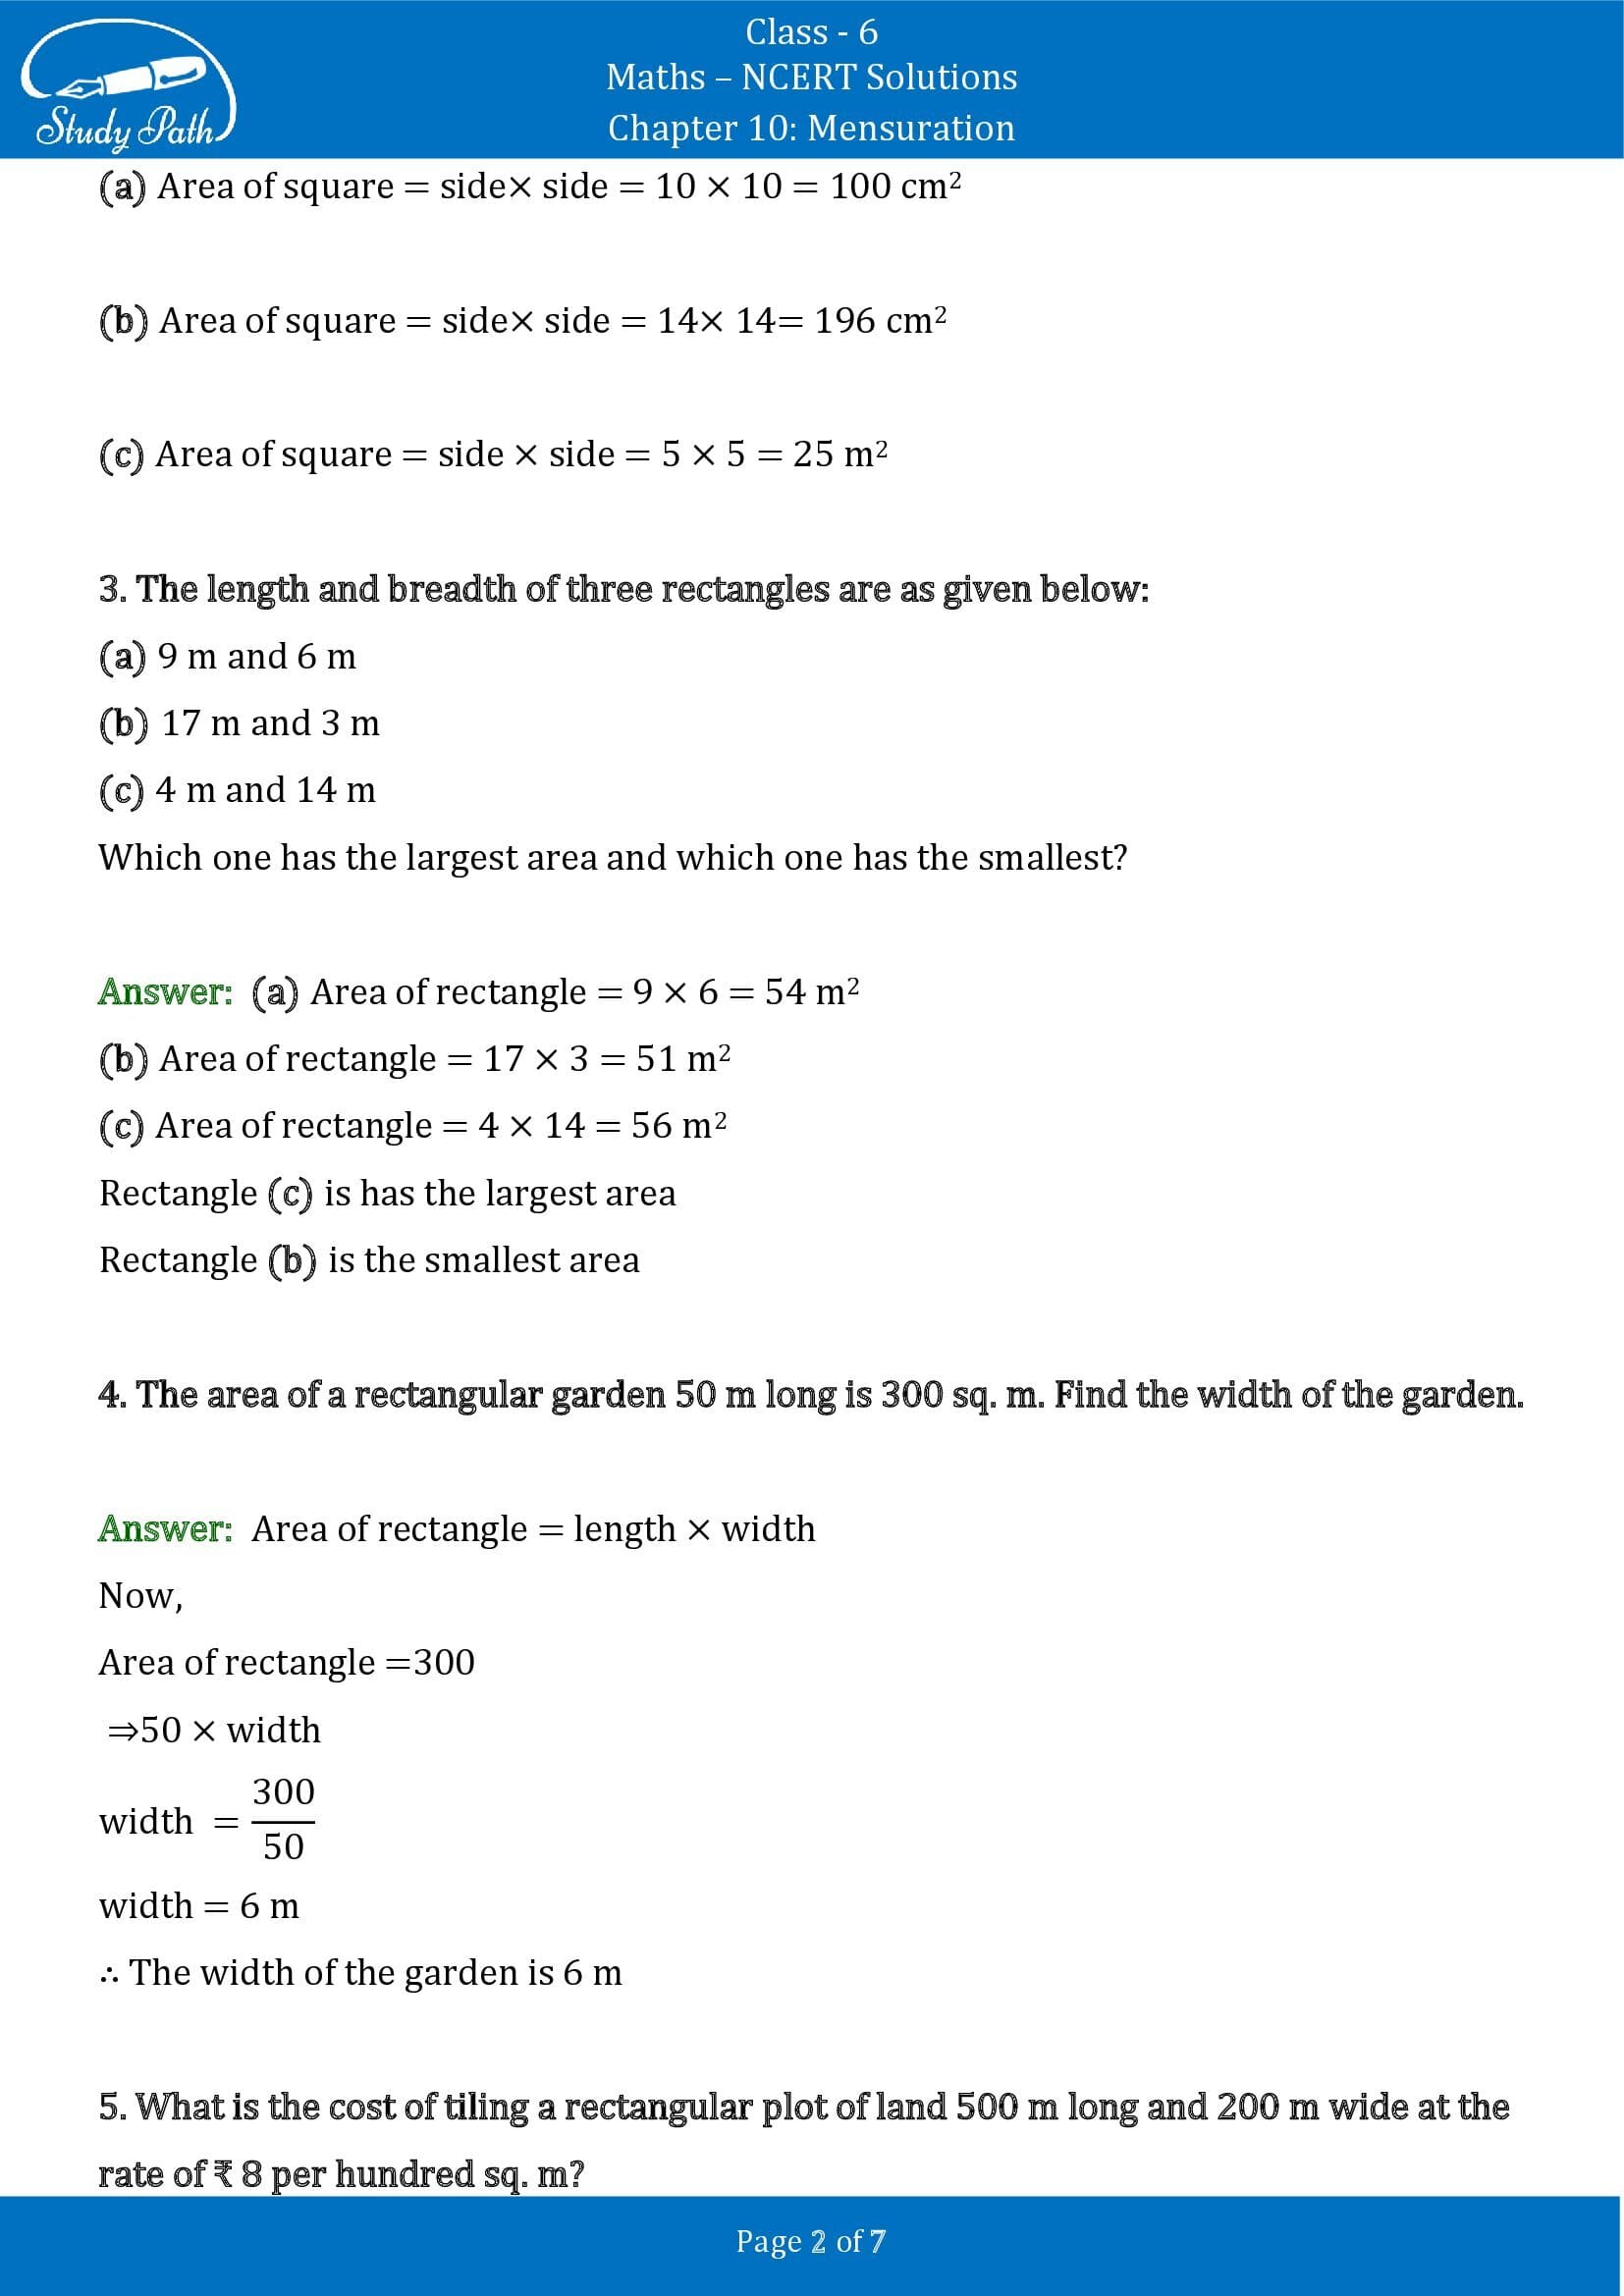 NCERT Solutions for Class 6 Maths Chapter 10 Mensuration Exercise 10.3 00002